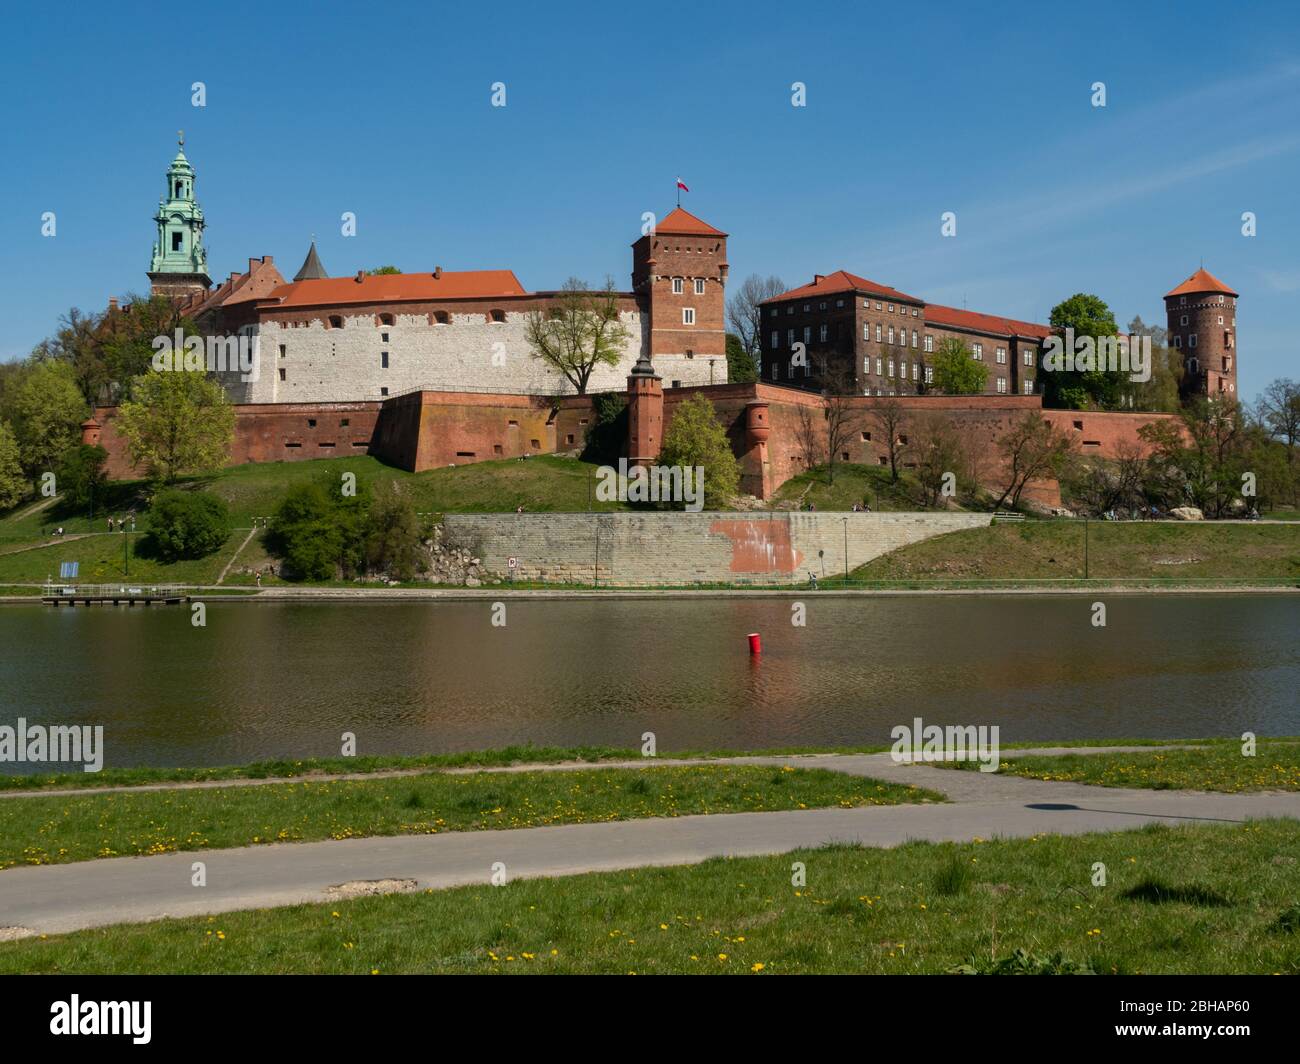 The former Royal residence of Polish monarchy, Wawel Castle, Krakow, Poland. Spring time, view from the Vistula river boulevard. Stock Photo